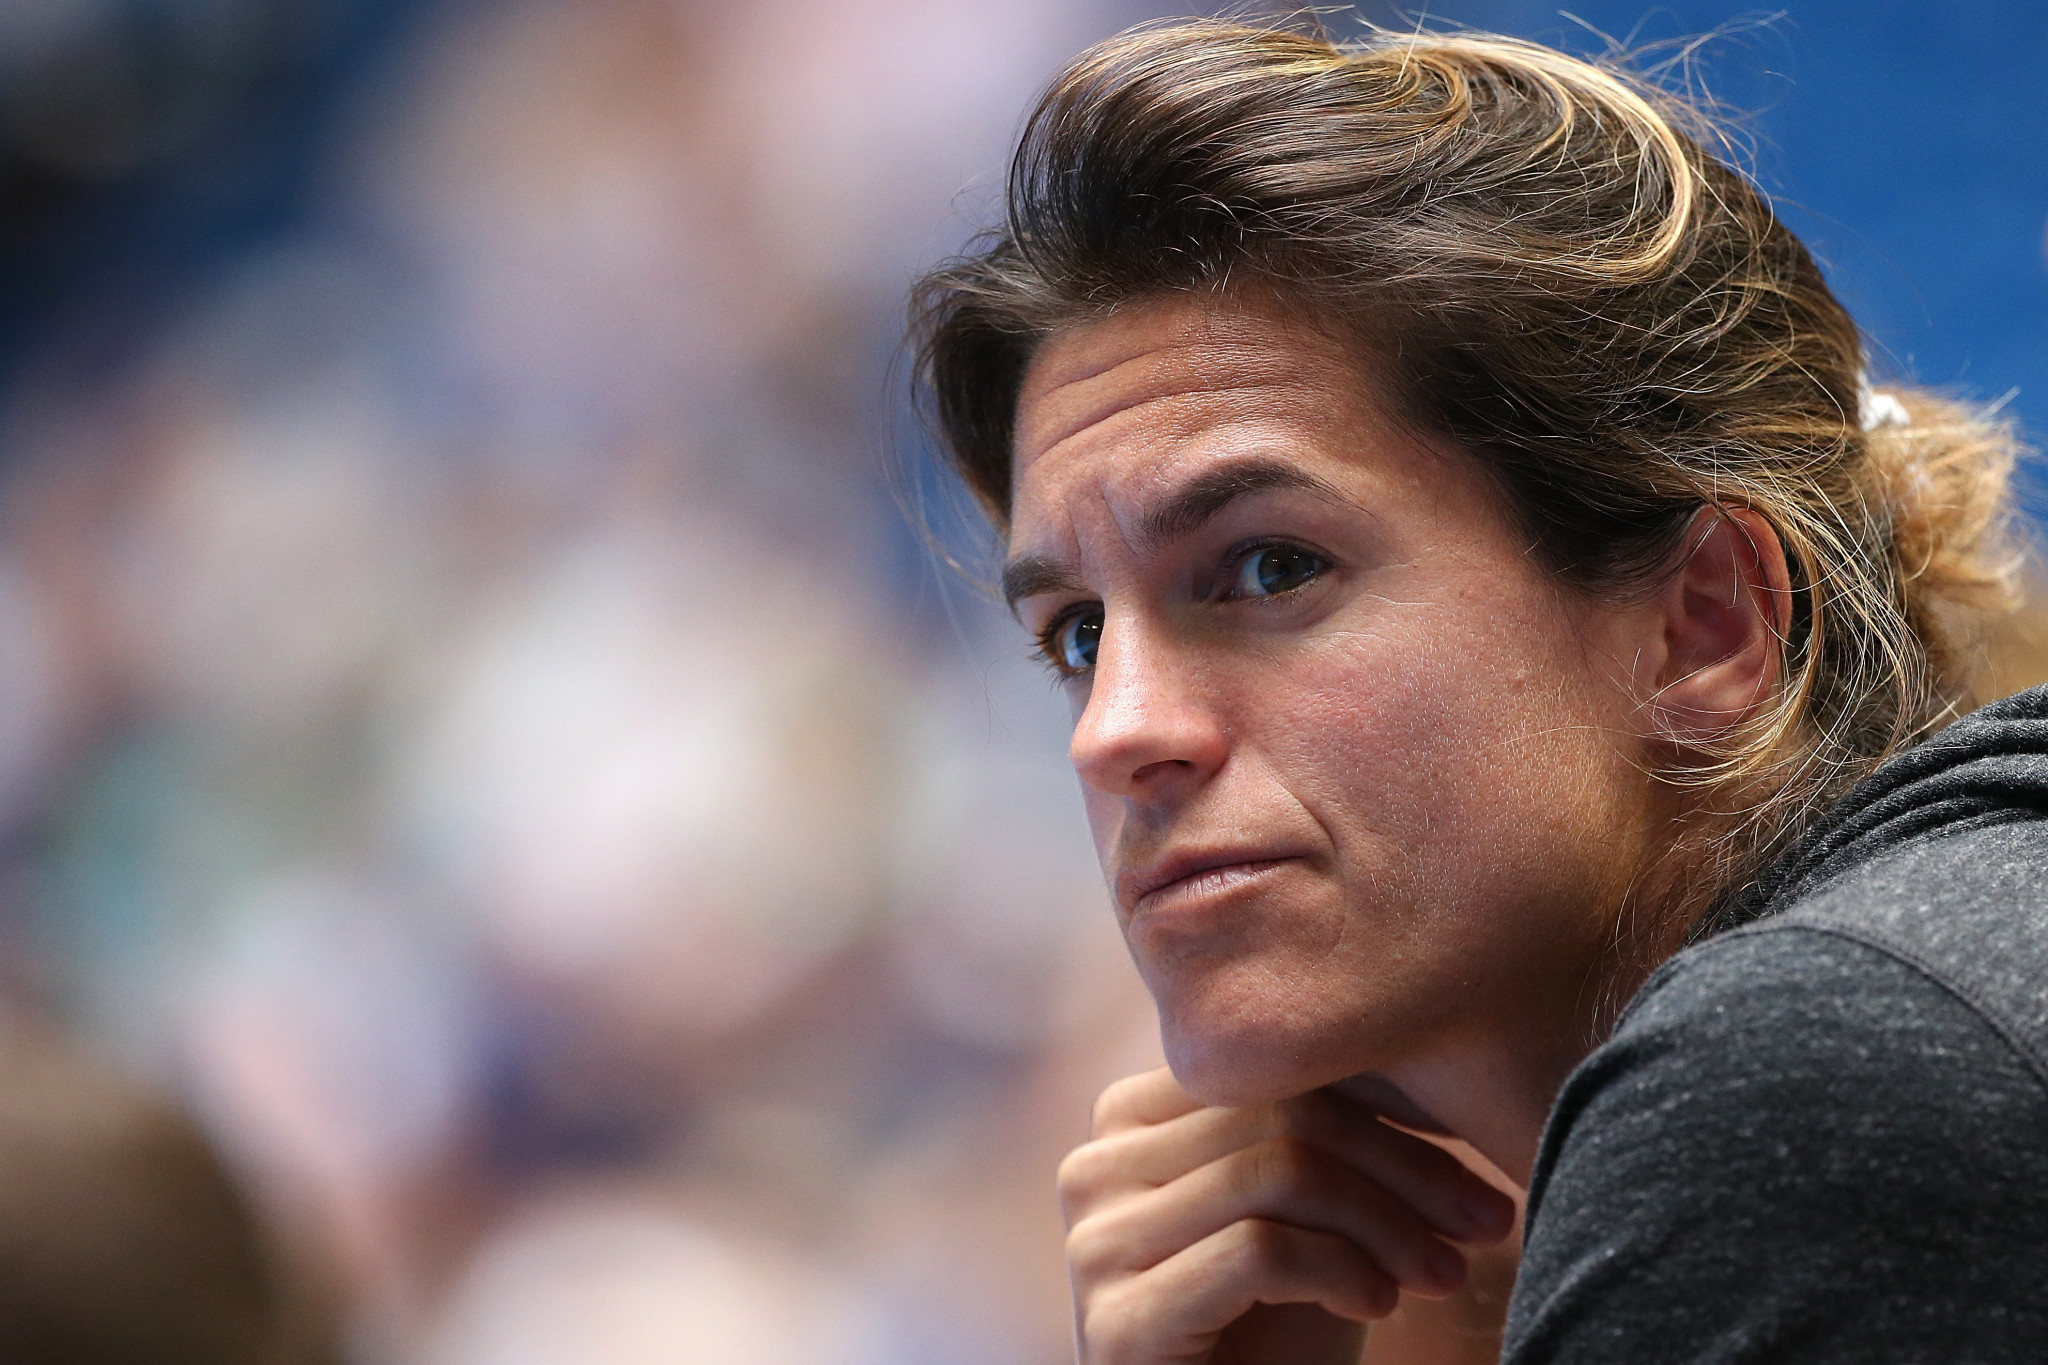 Amelie Mauresmo believes there is "no fair decision" that can be made on Russian and Belarusian players ©Getty Images